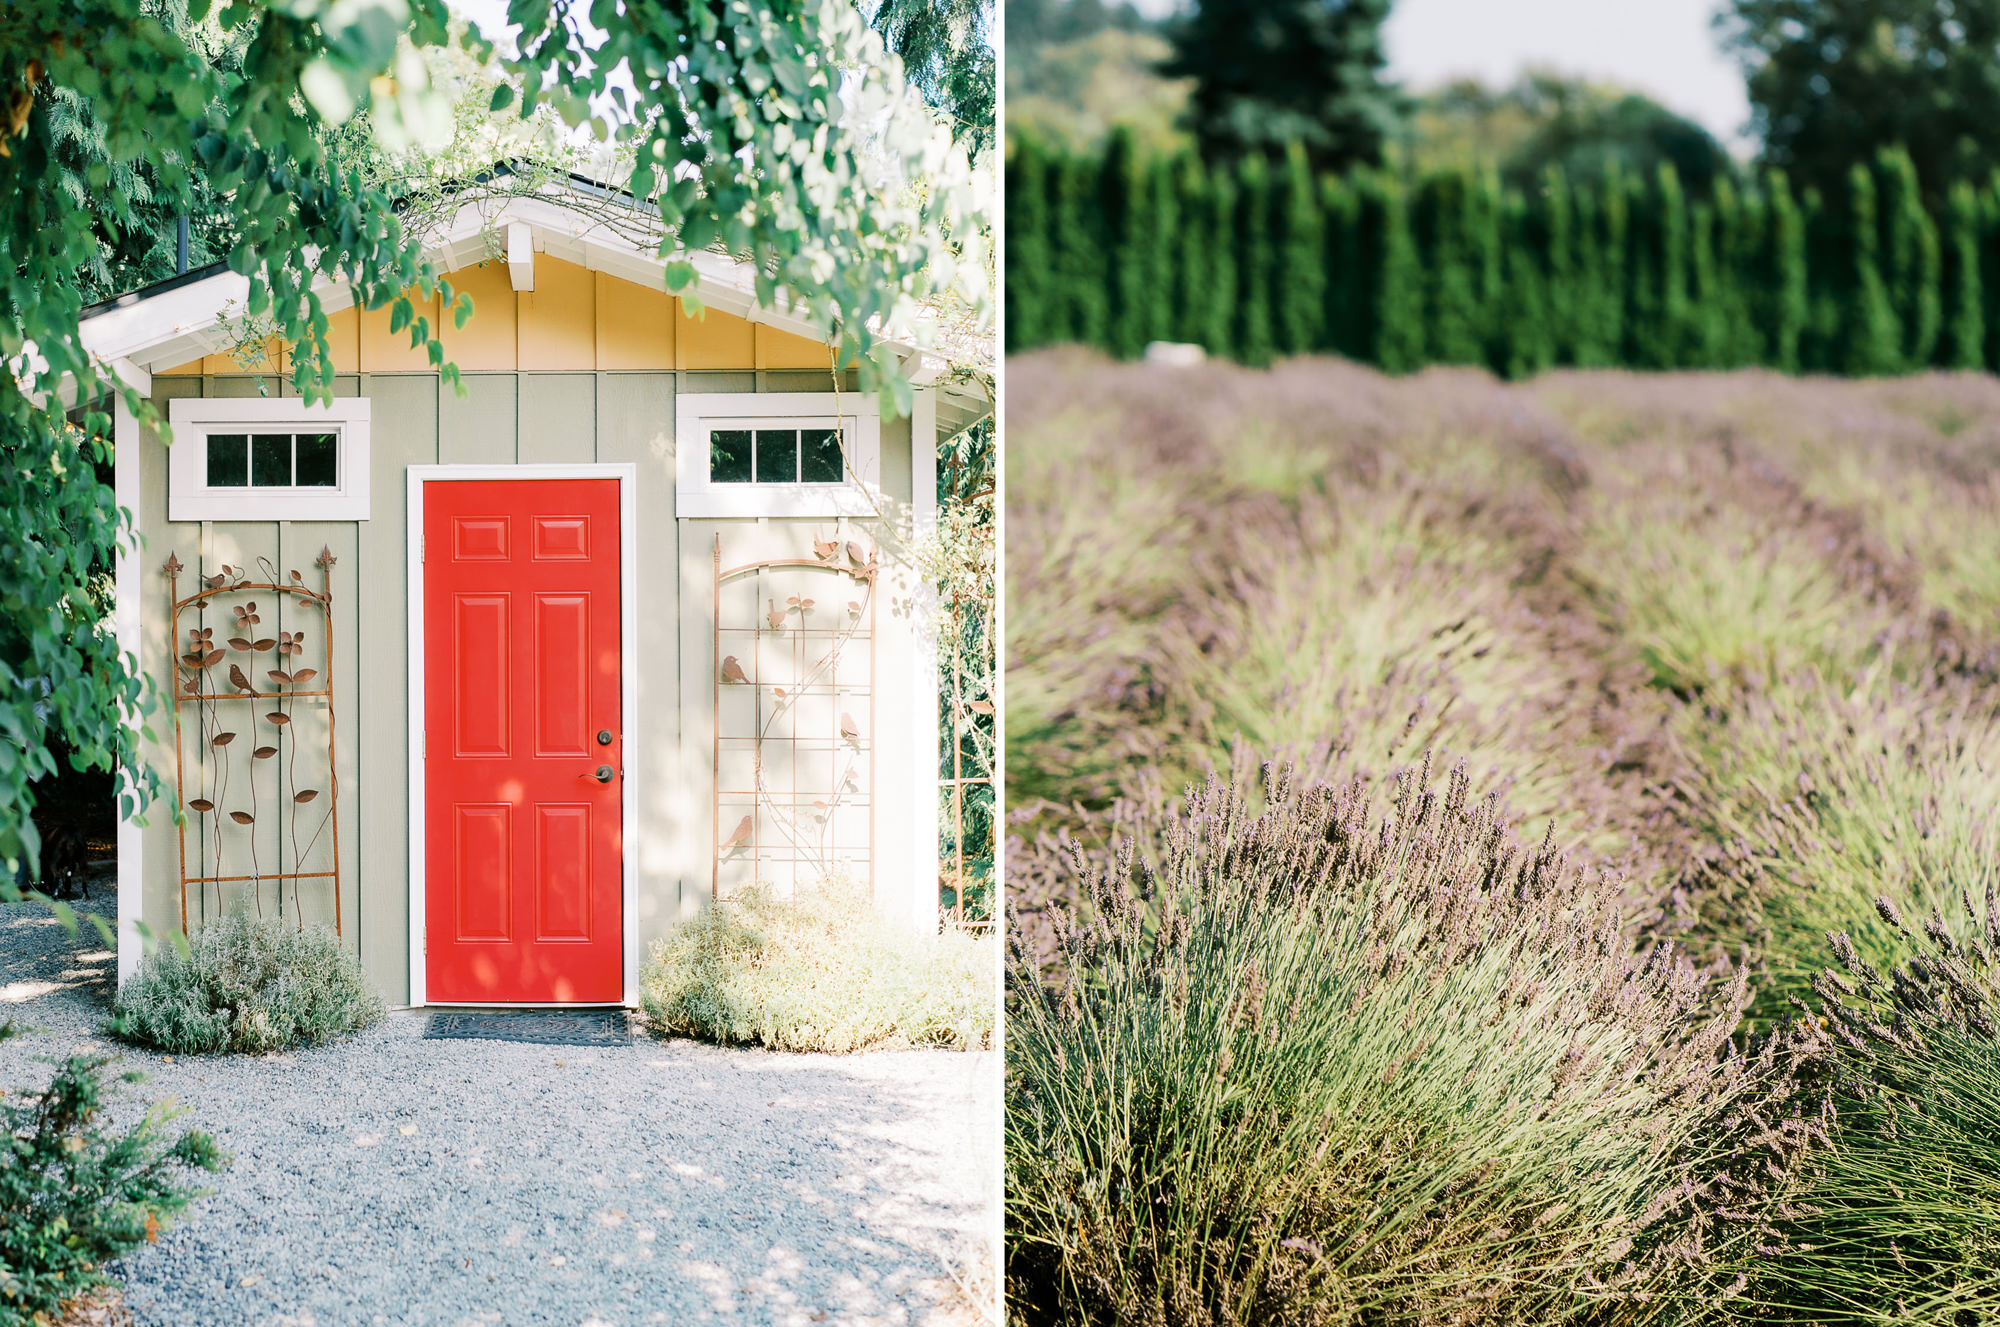 Woodinville Lavender Farm Weddings: Lindsay and Andres